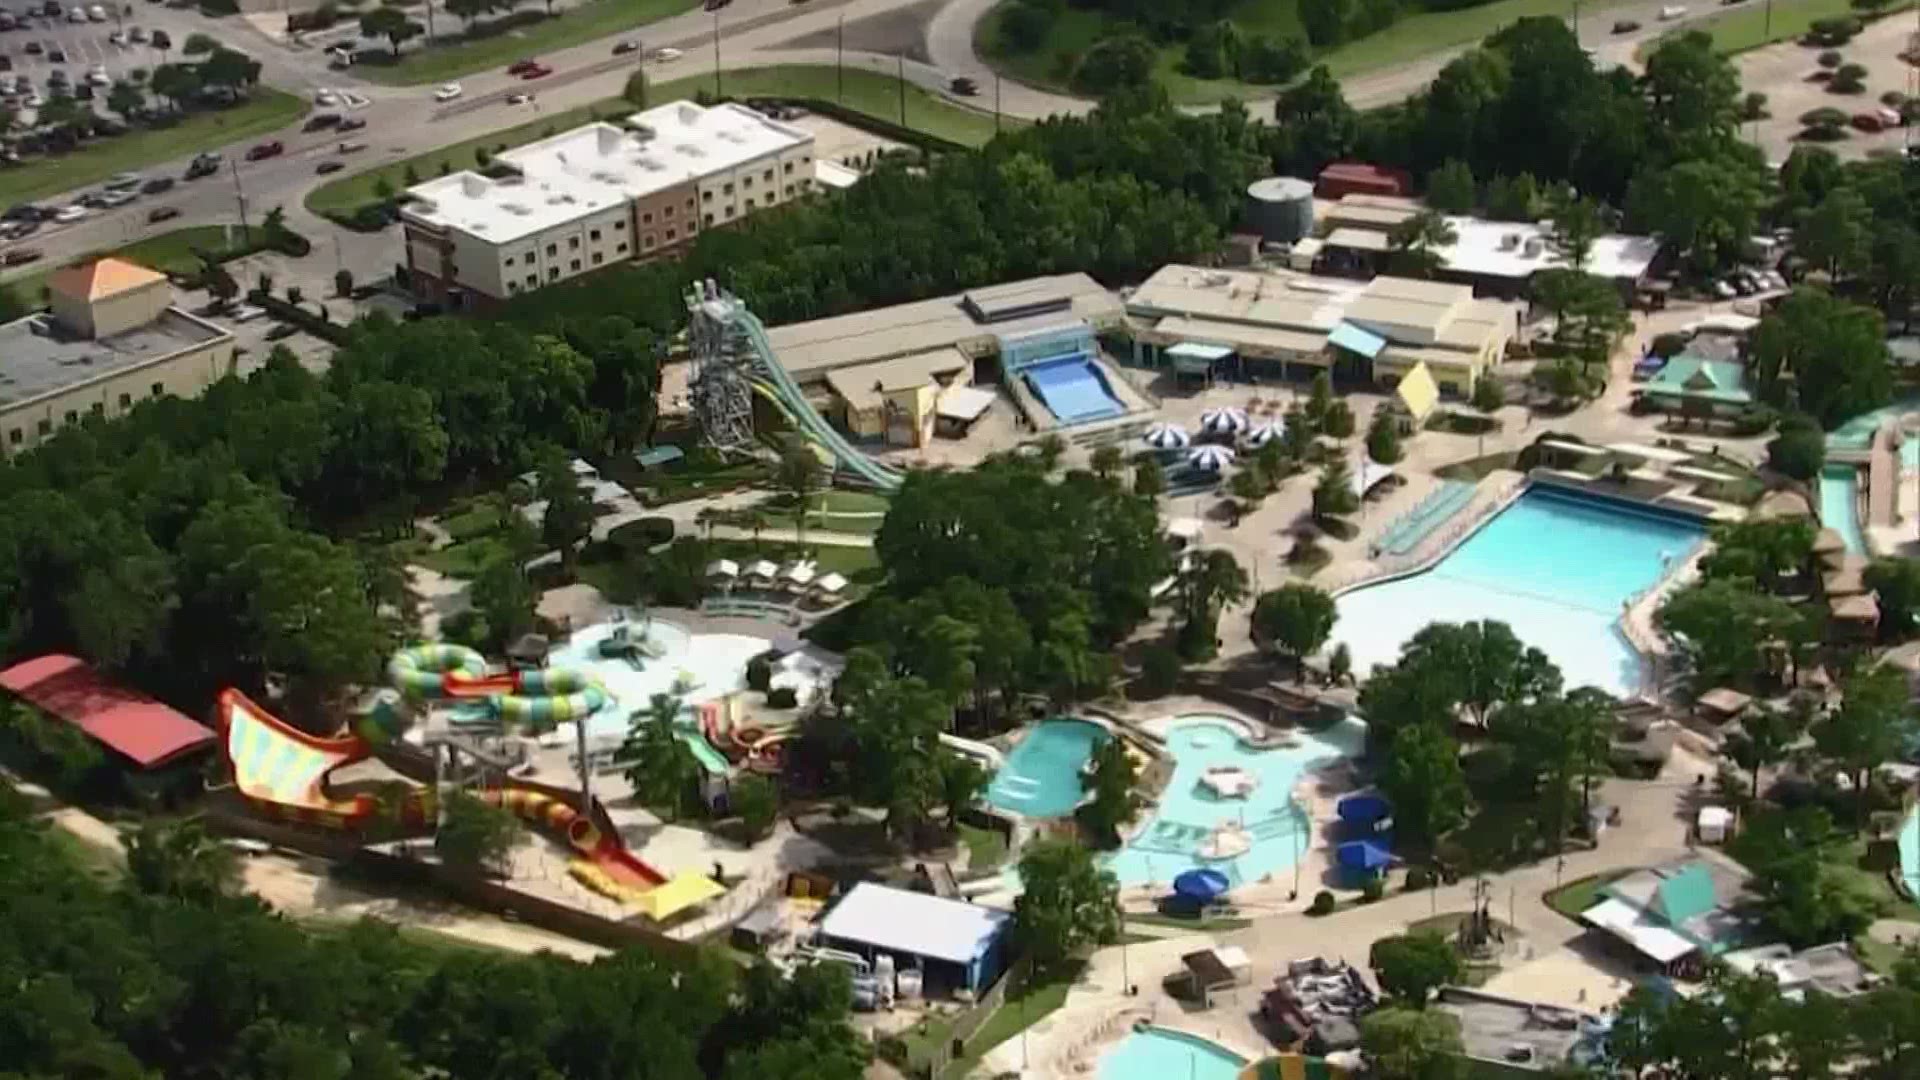 Spring firefighters were the first on scene after receiving 911 calls about the chemical incident at Hurricane Harbor Splashtown.